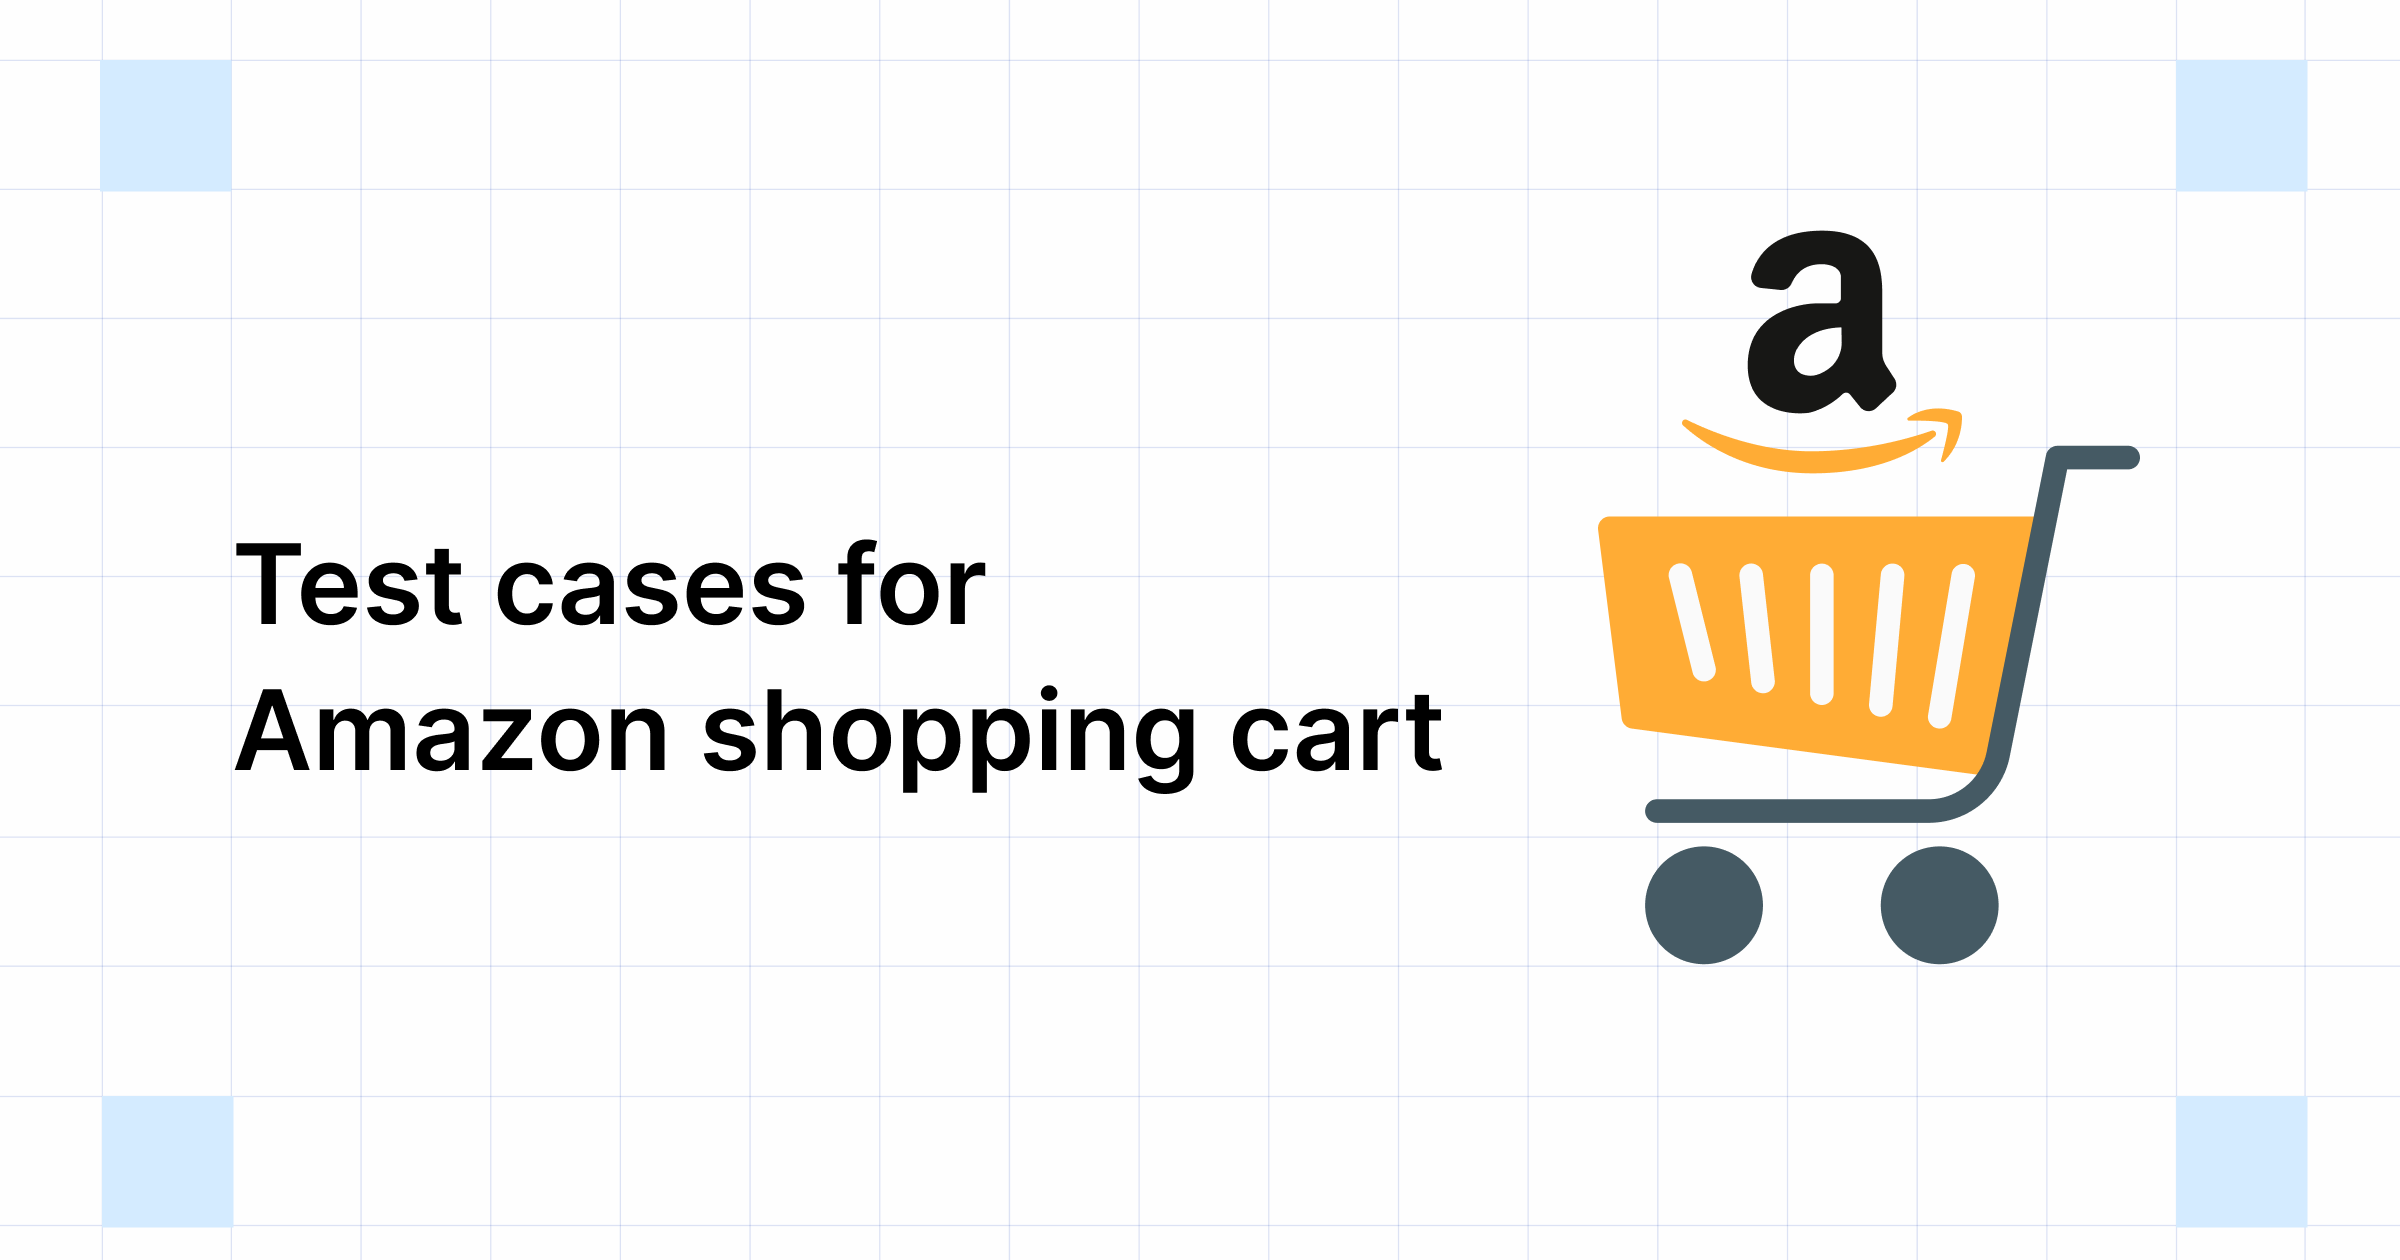 How to write test cases for Amazon shopping cart